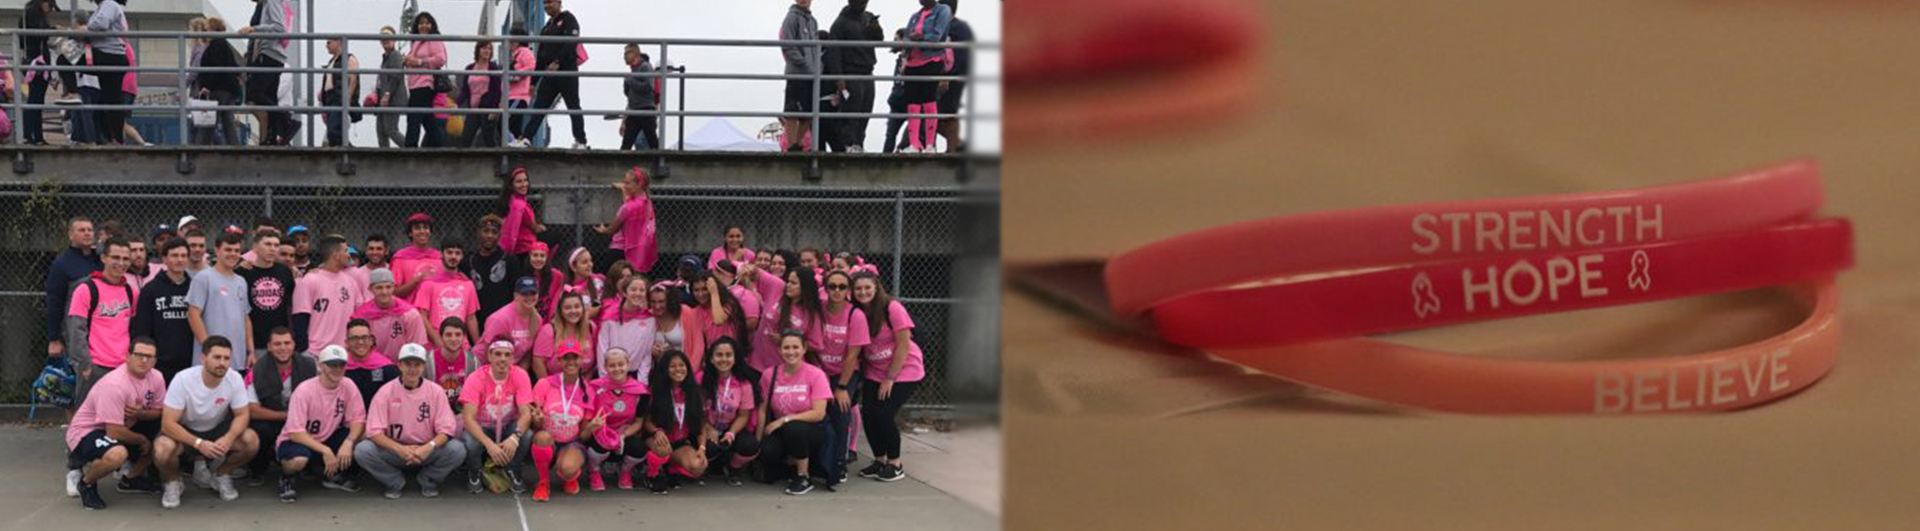 SJC students wearing pink in support of breast cancer awareness as they prepare for the annual Making Strides Against Breast Cancer Walk-a-thon at Jones Beach.